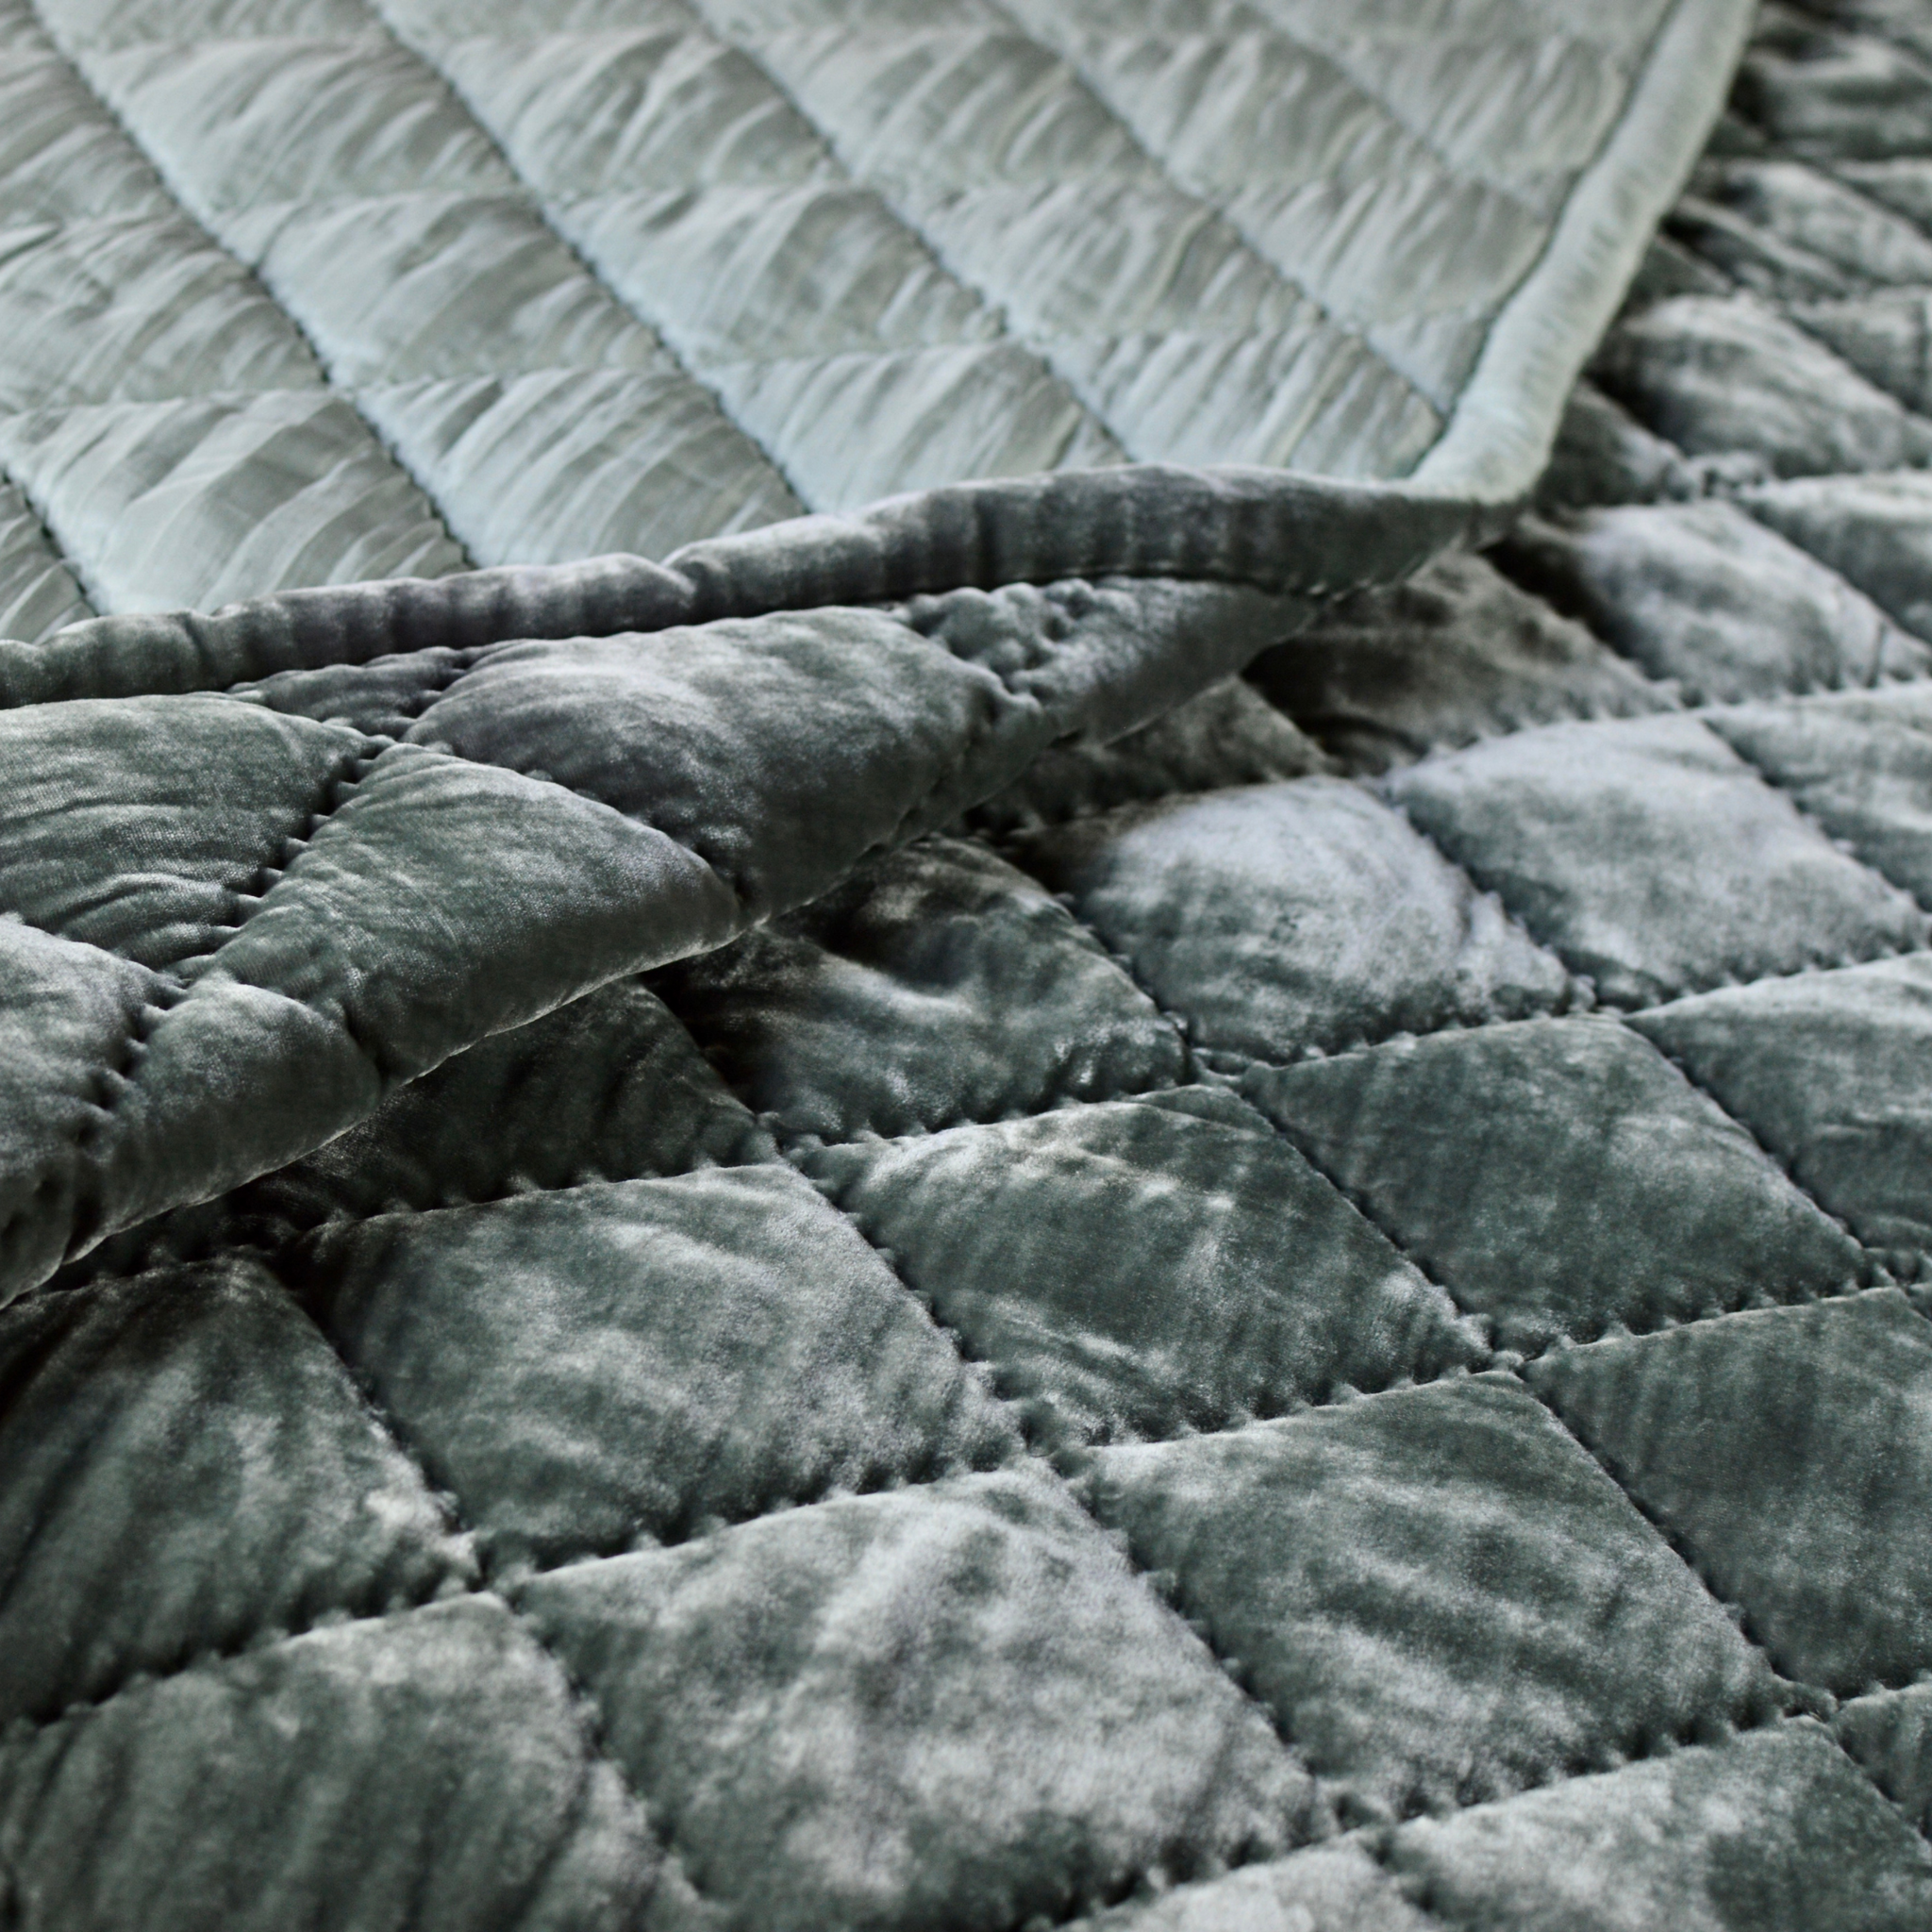 Silk Velvet Hand Quilted Duvet Covers -Diamond Hand Stitching- Seaweed & Mint